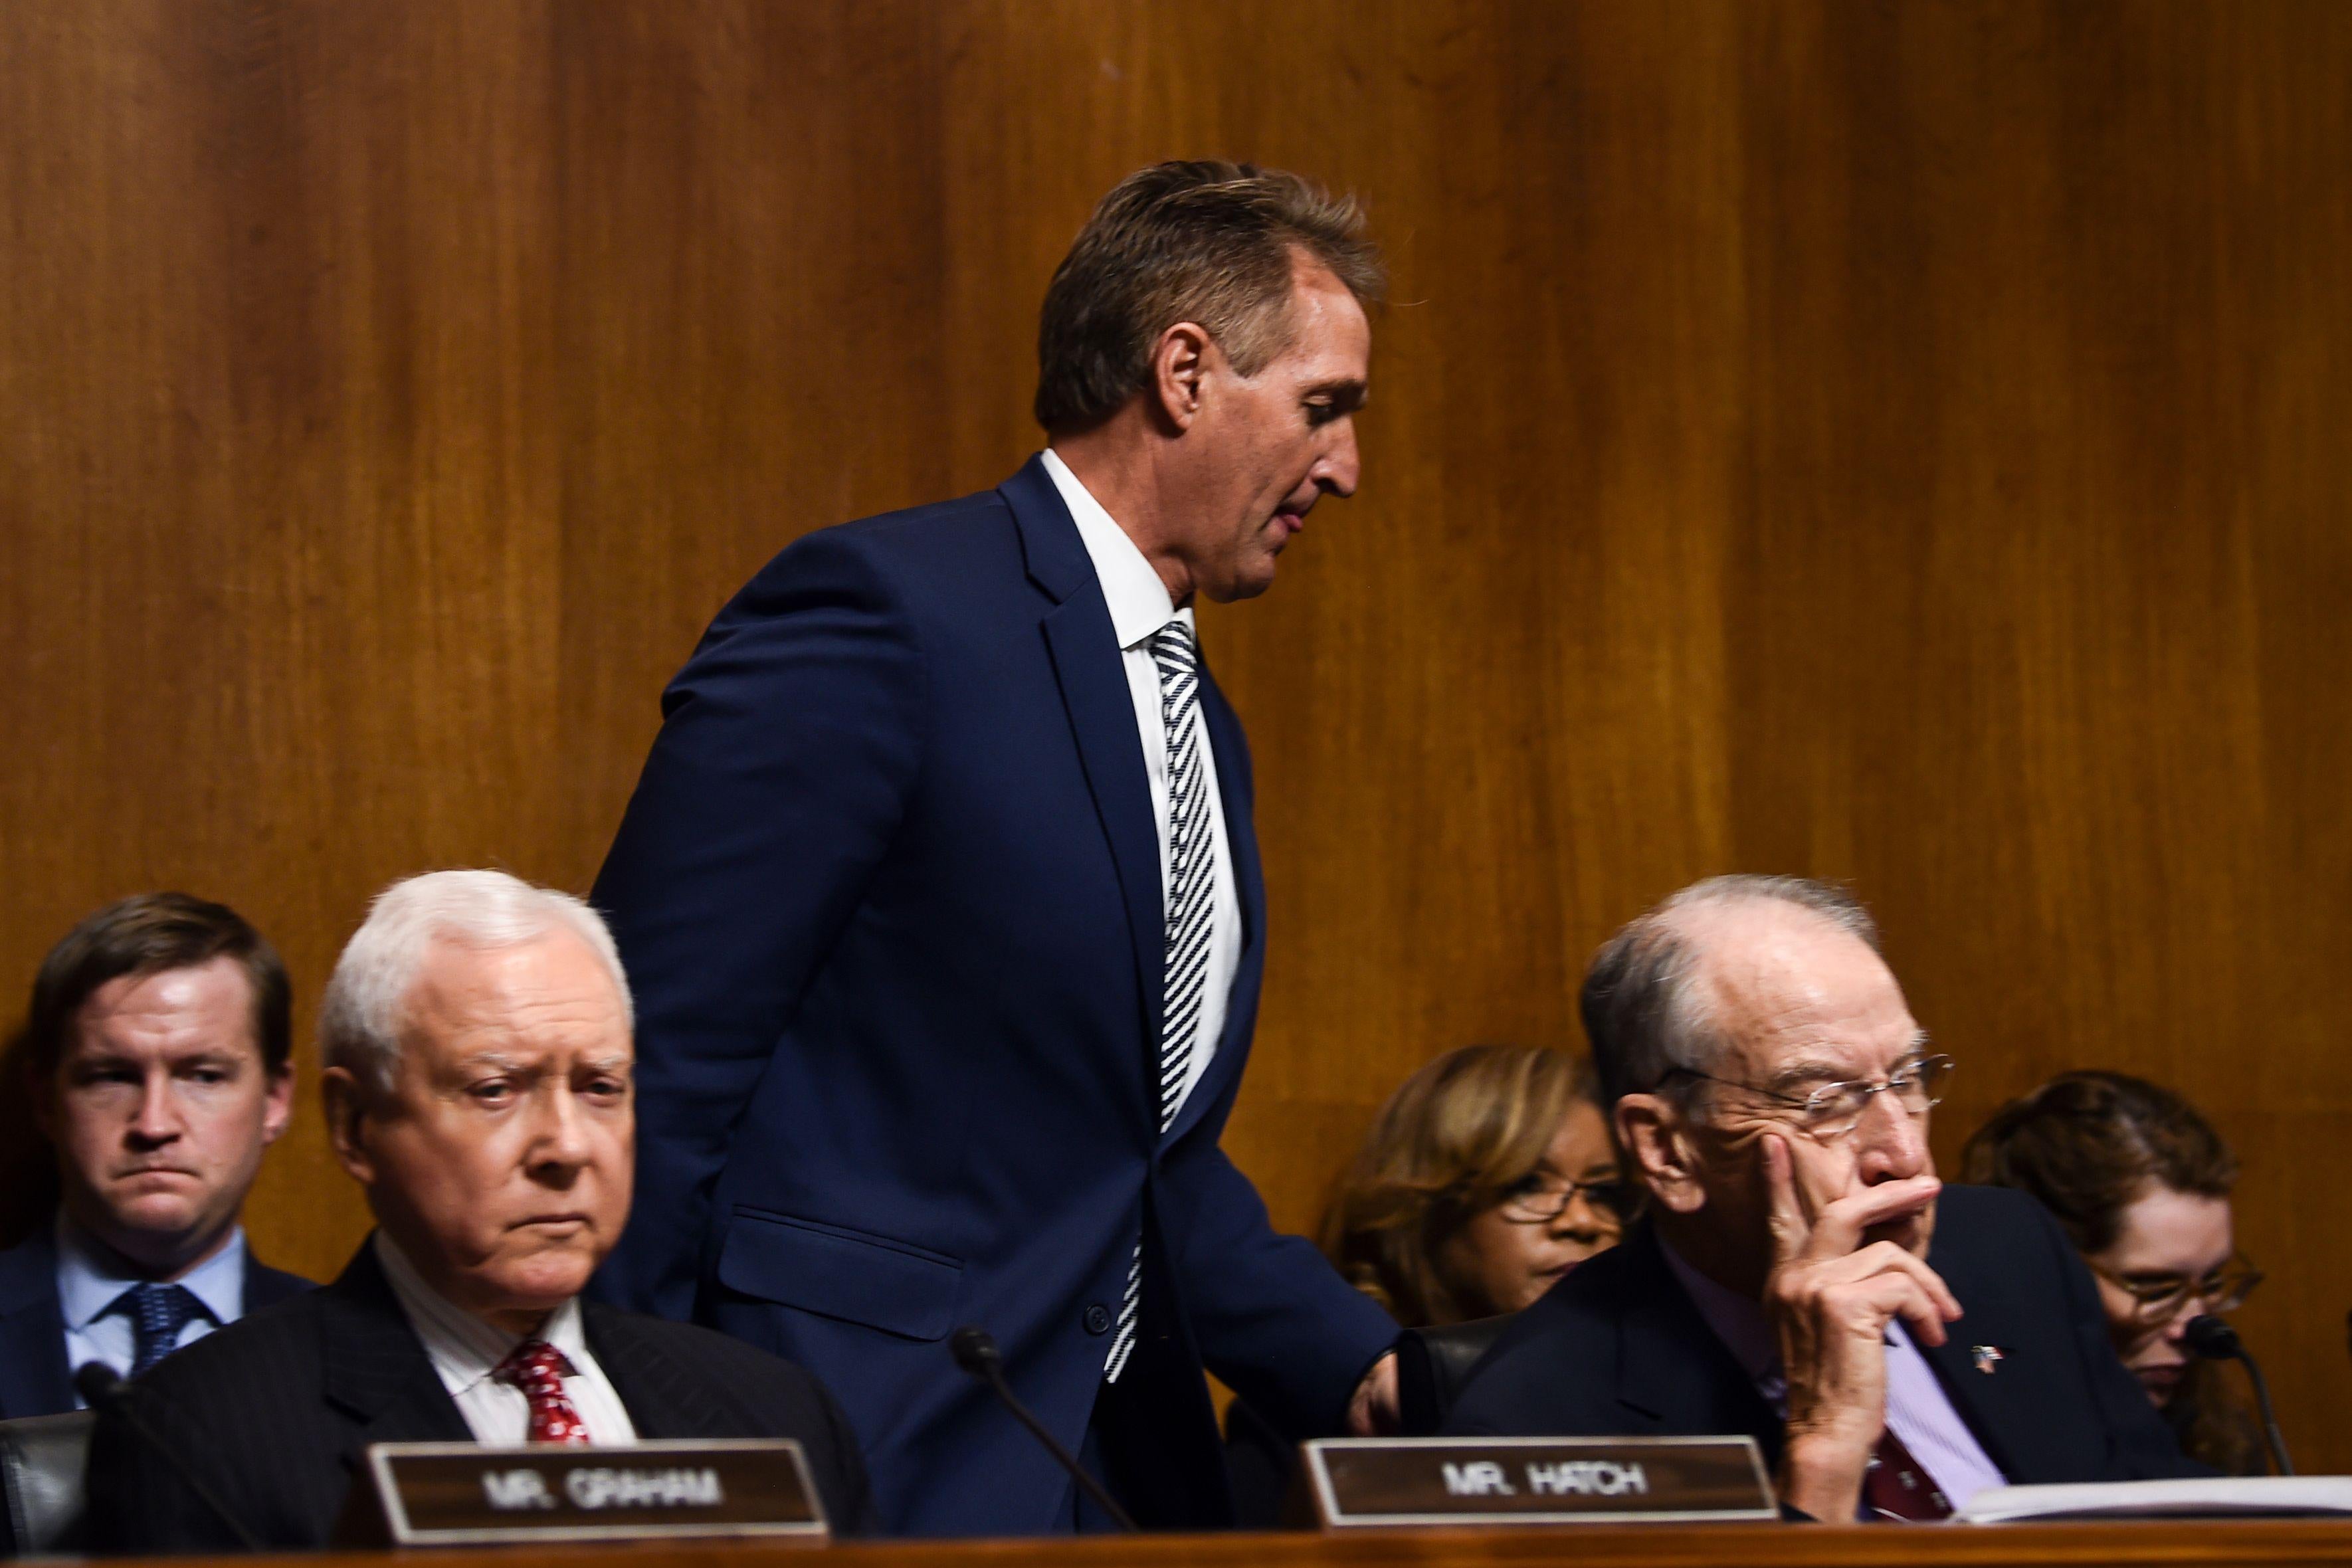 Jeff Flake walks out during a hearing on Brett Kavanaugh's nomination.